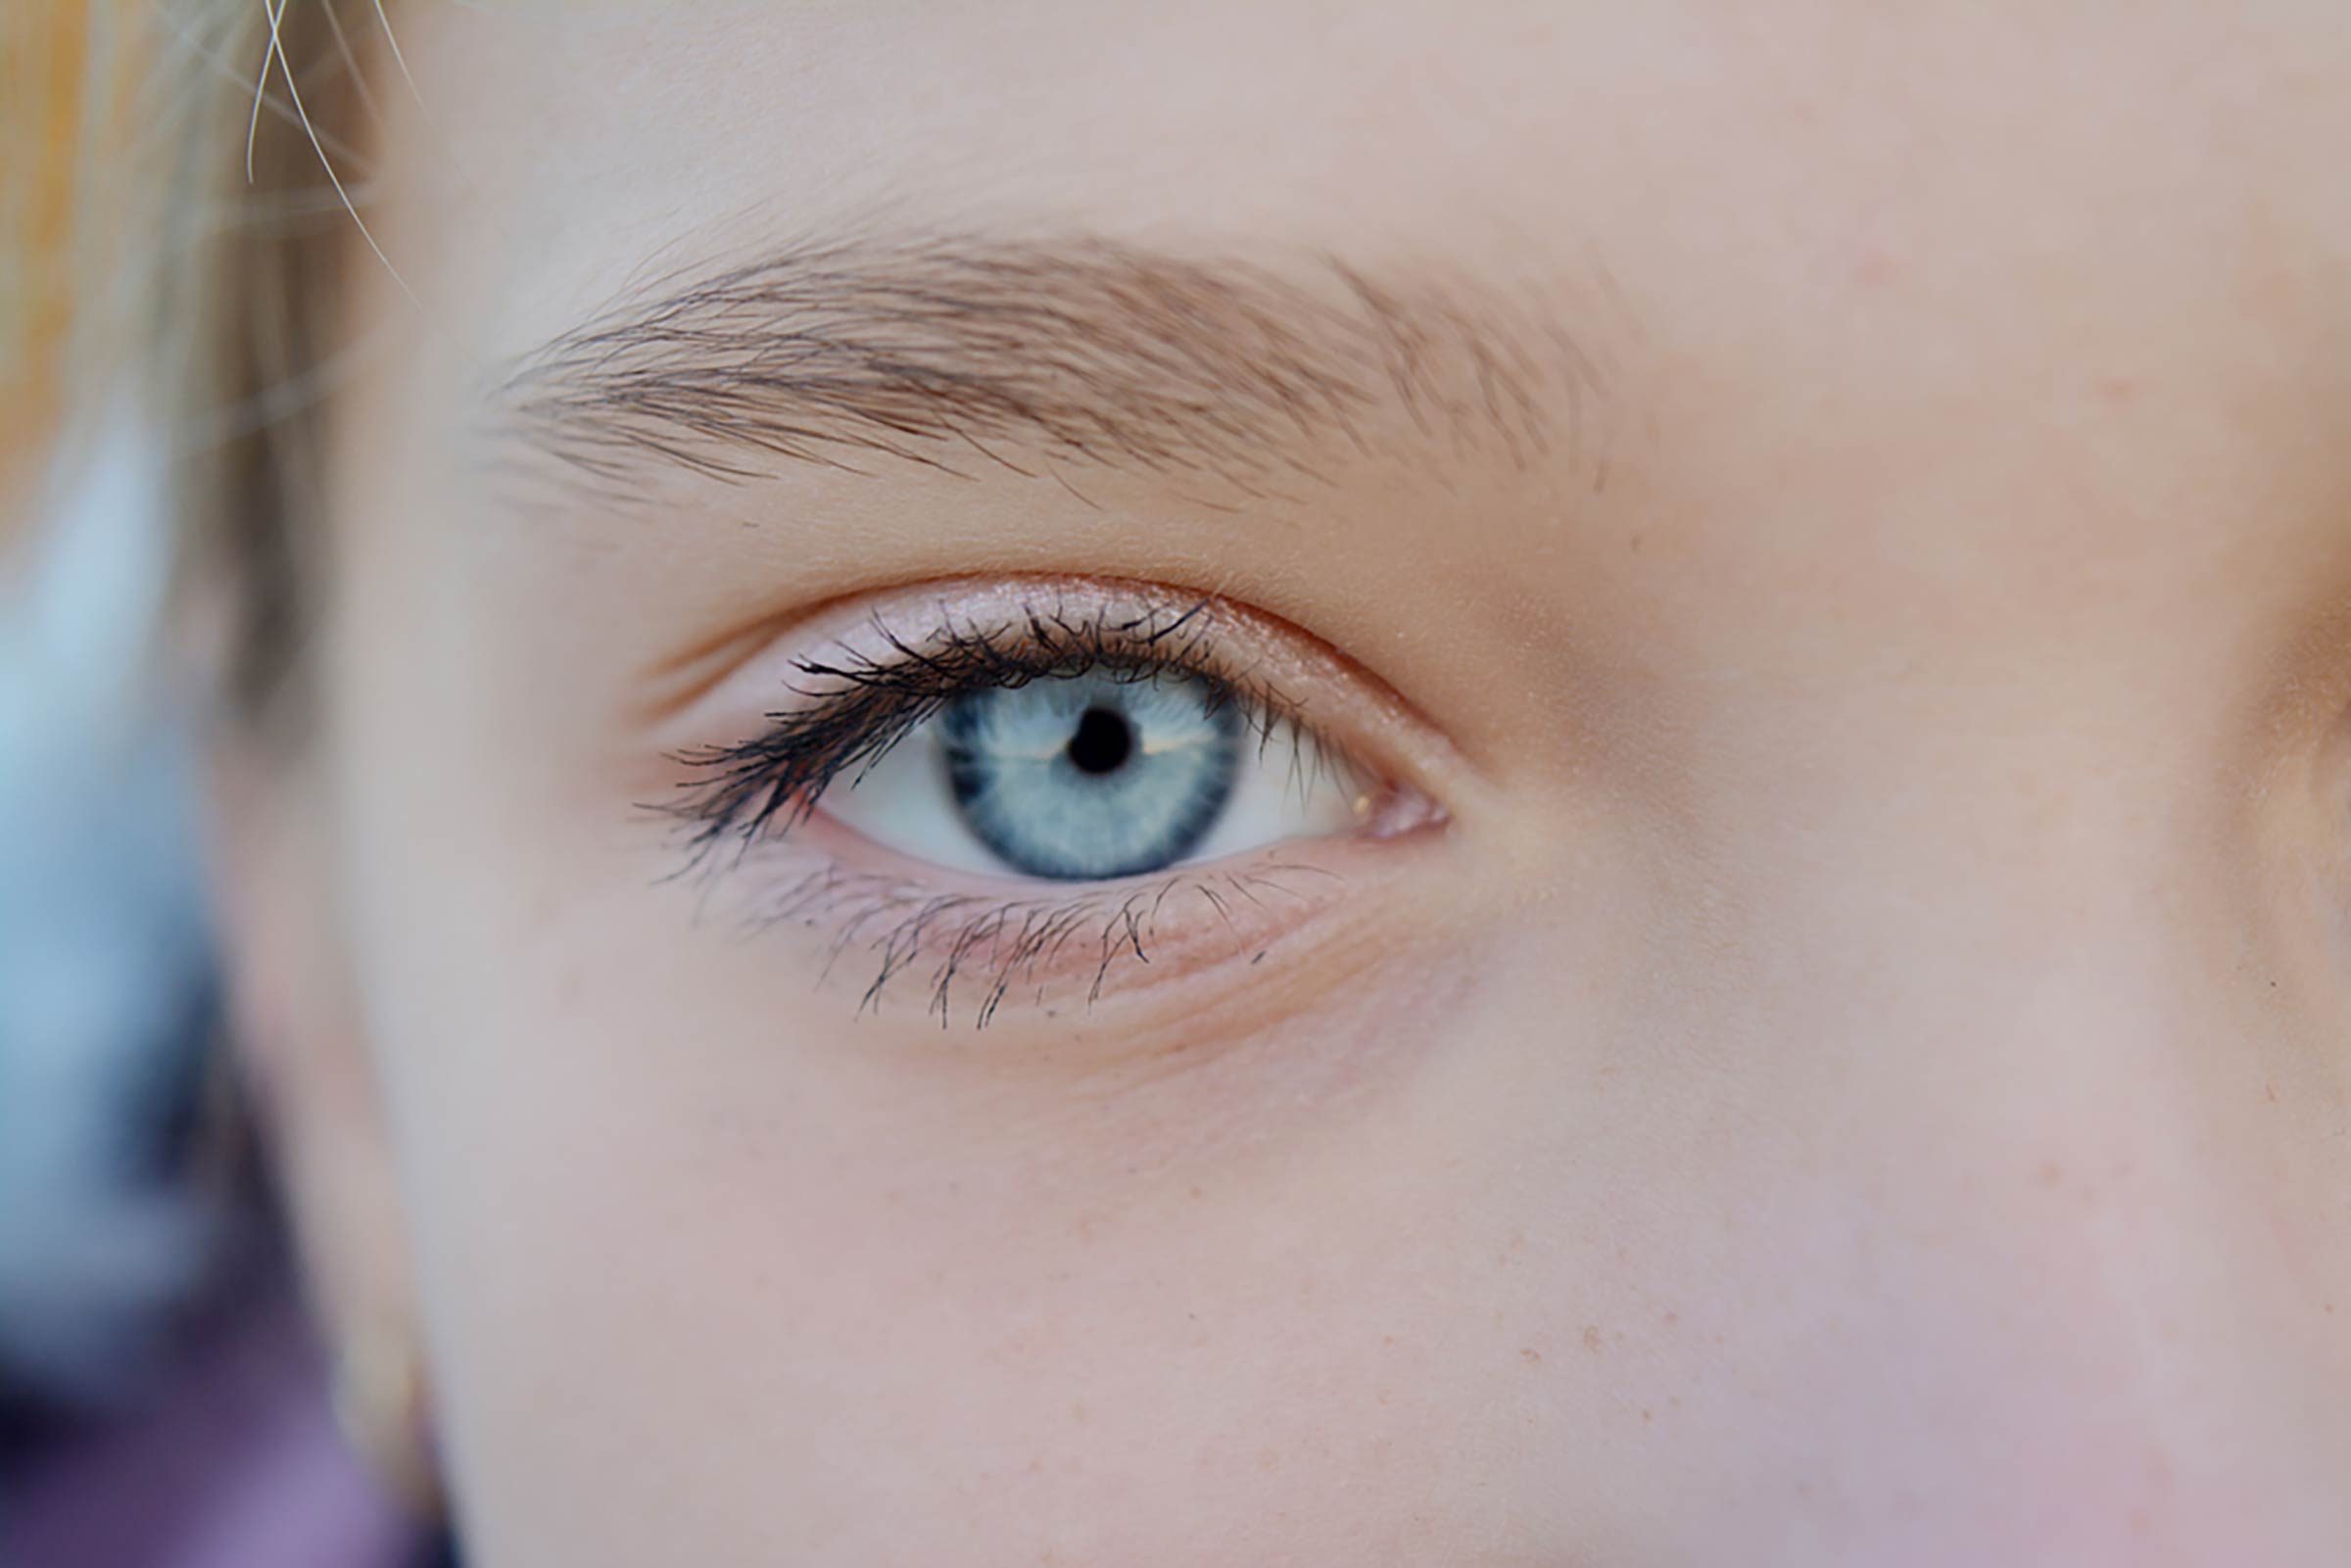 How Rare Are Blue Eyes?